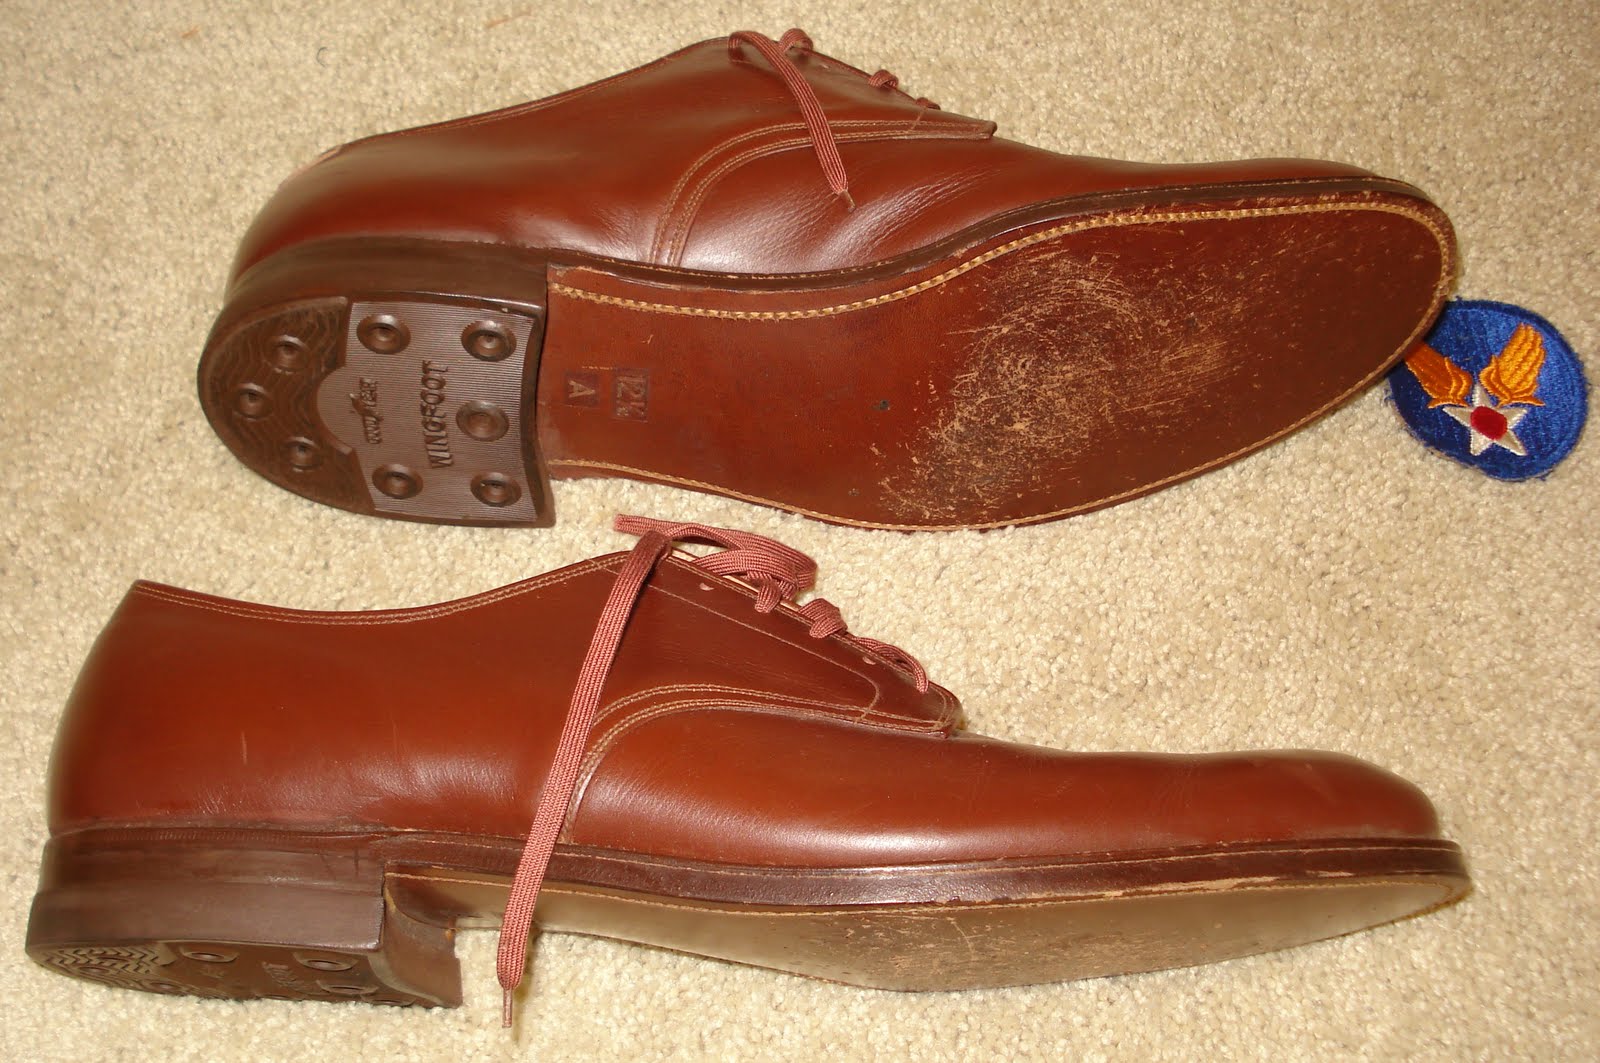 Nostalgia on Wheels: WWII USAF Officer Shoes with Goodyear Heels